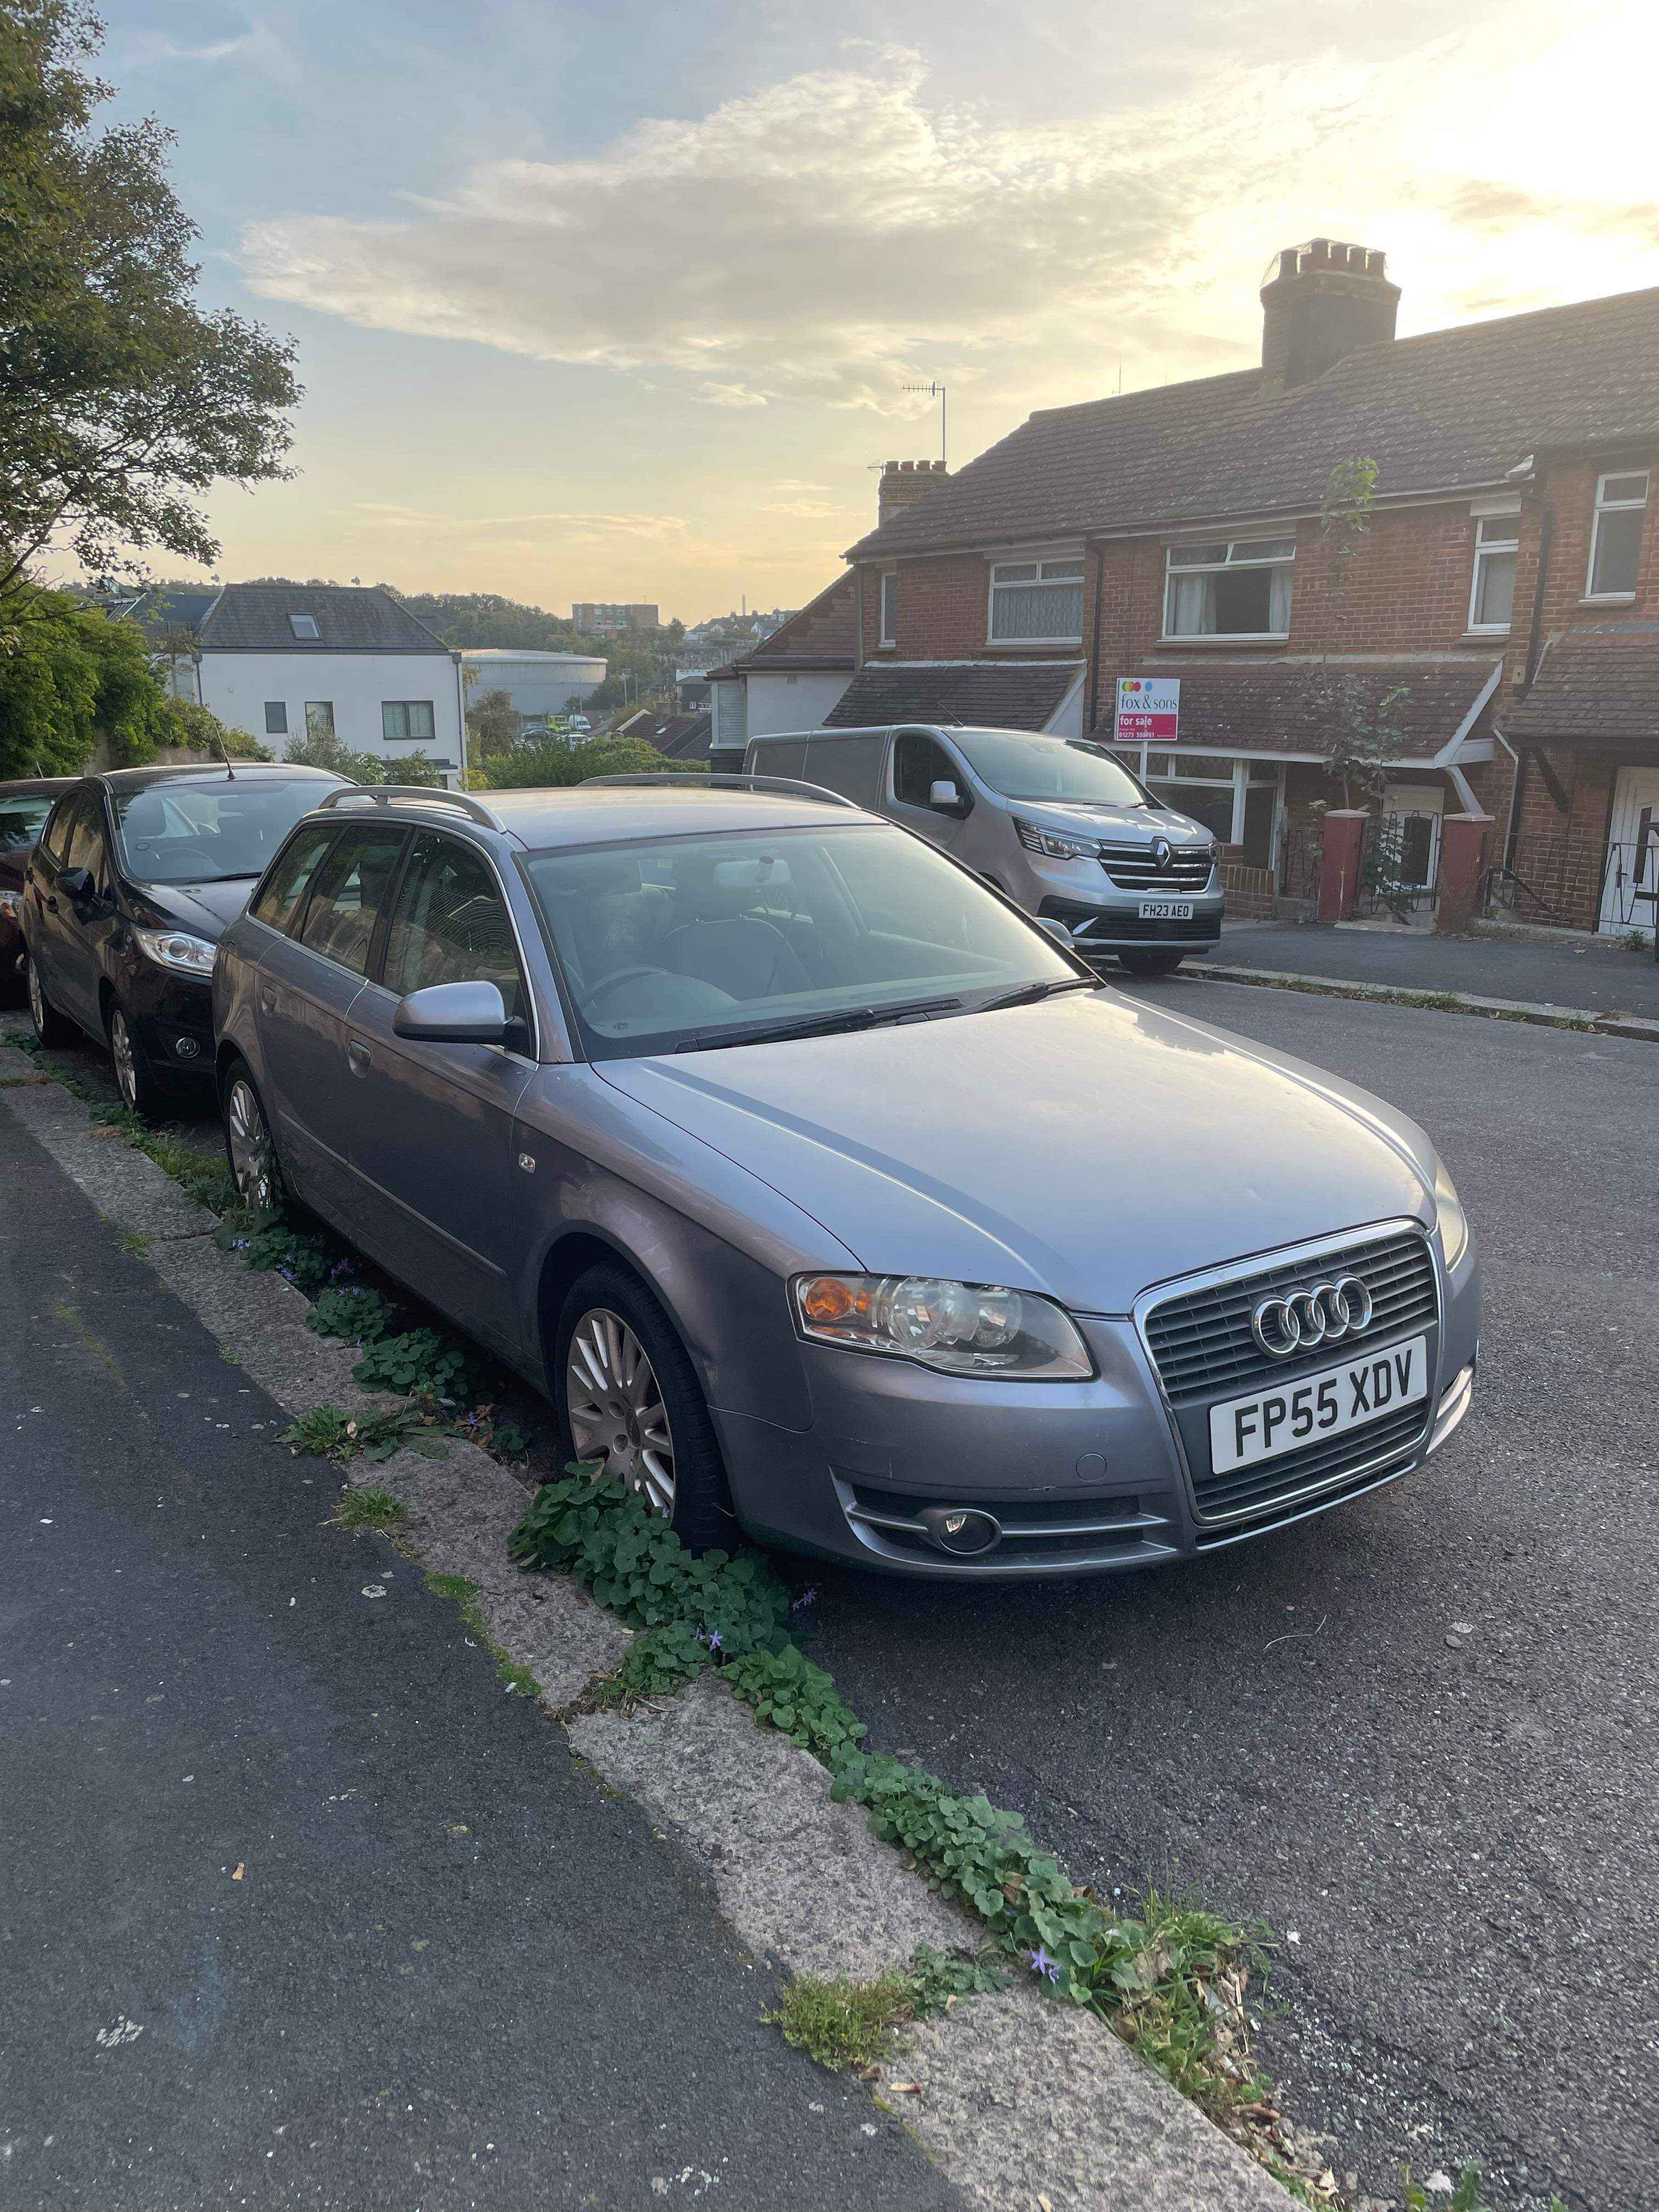 Photograph of FP55 XDV - a Silver Audi A4 parked in Hollingdean by a non-resident, and potentially abandoned. The first of two photographs supplied by the residents of Hollingdean.